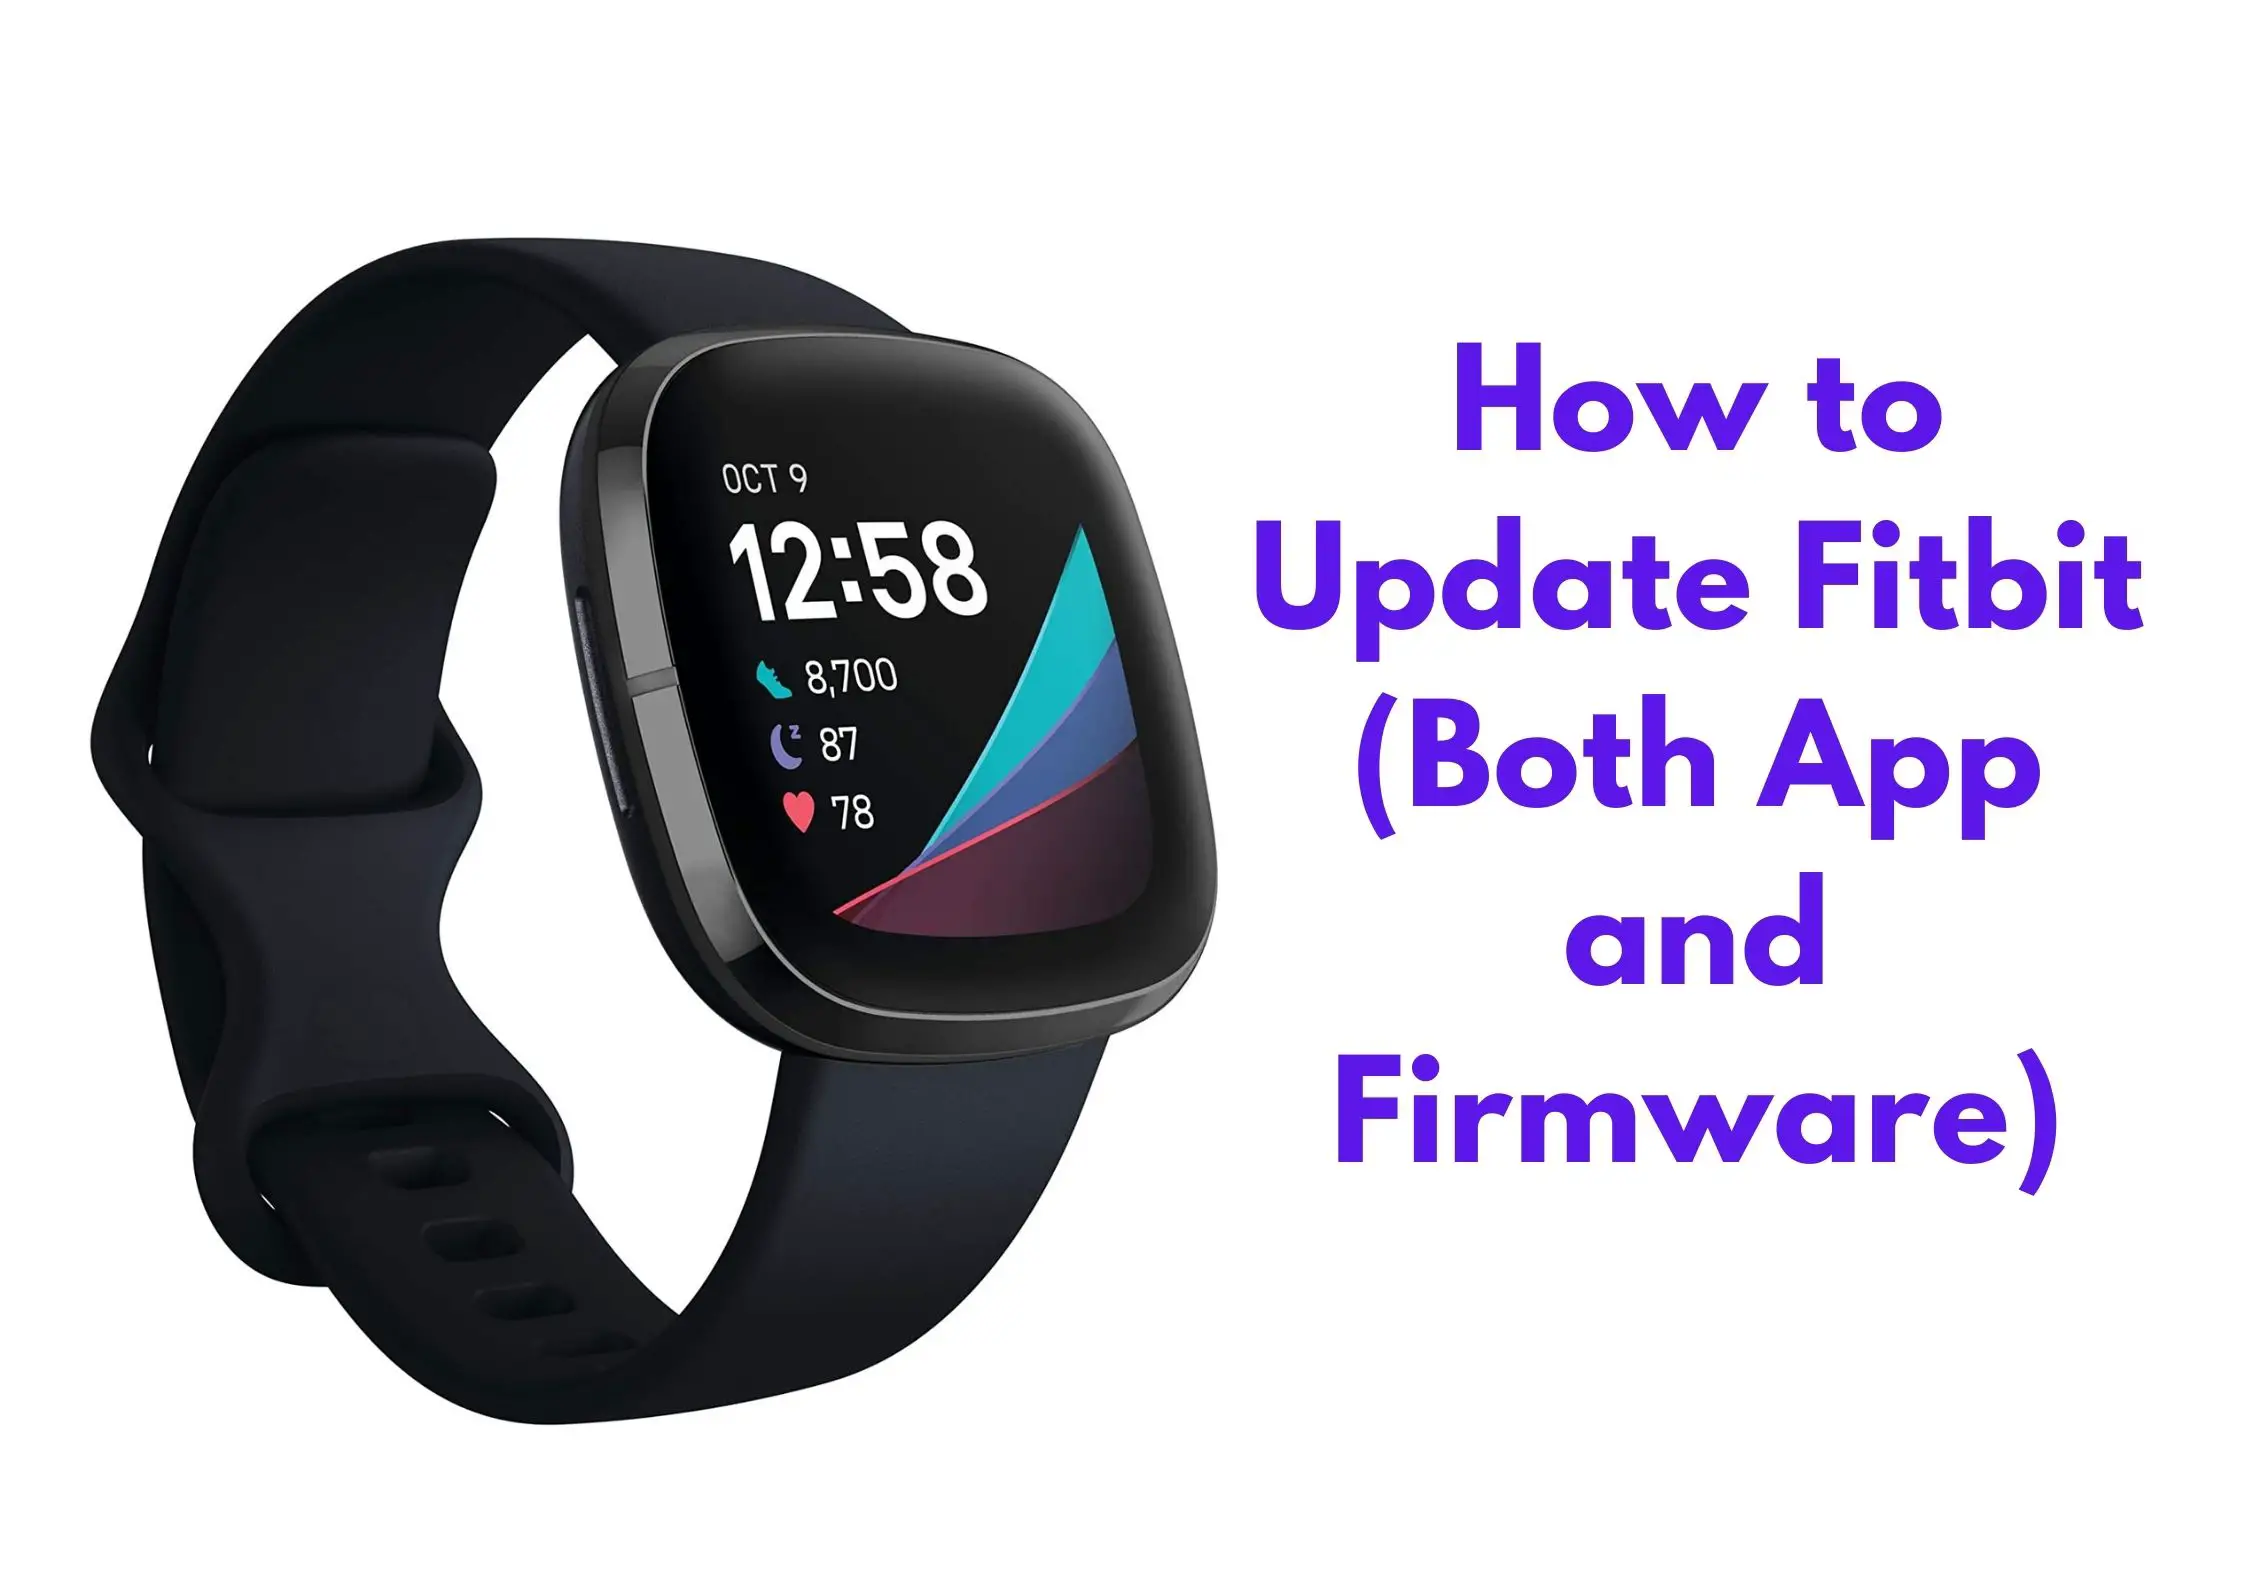 How to Update Fitbit (Both App and Firmware)